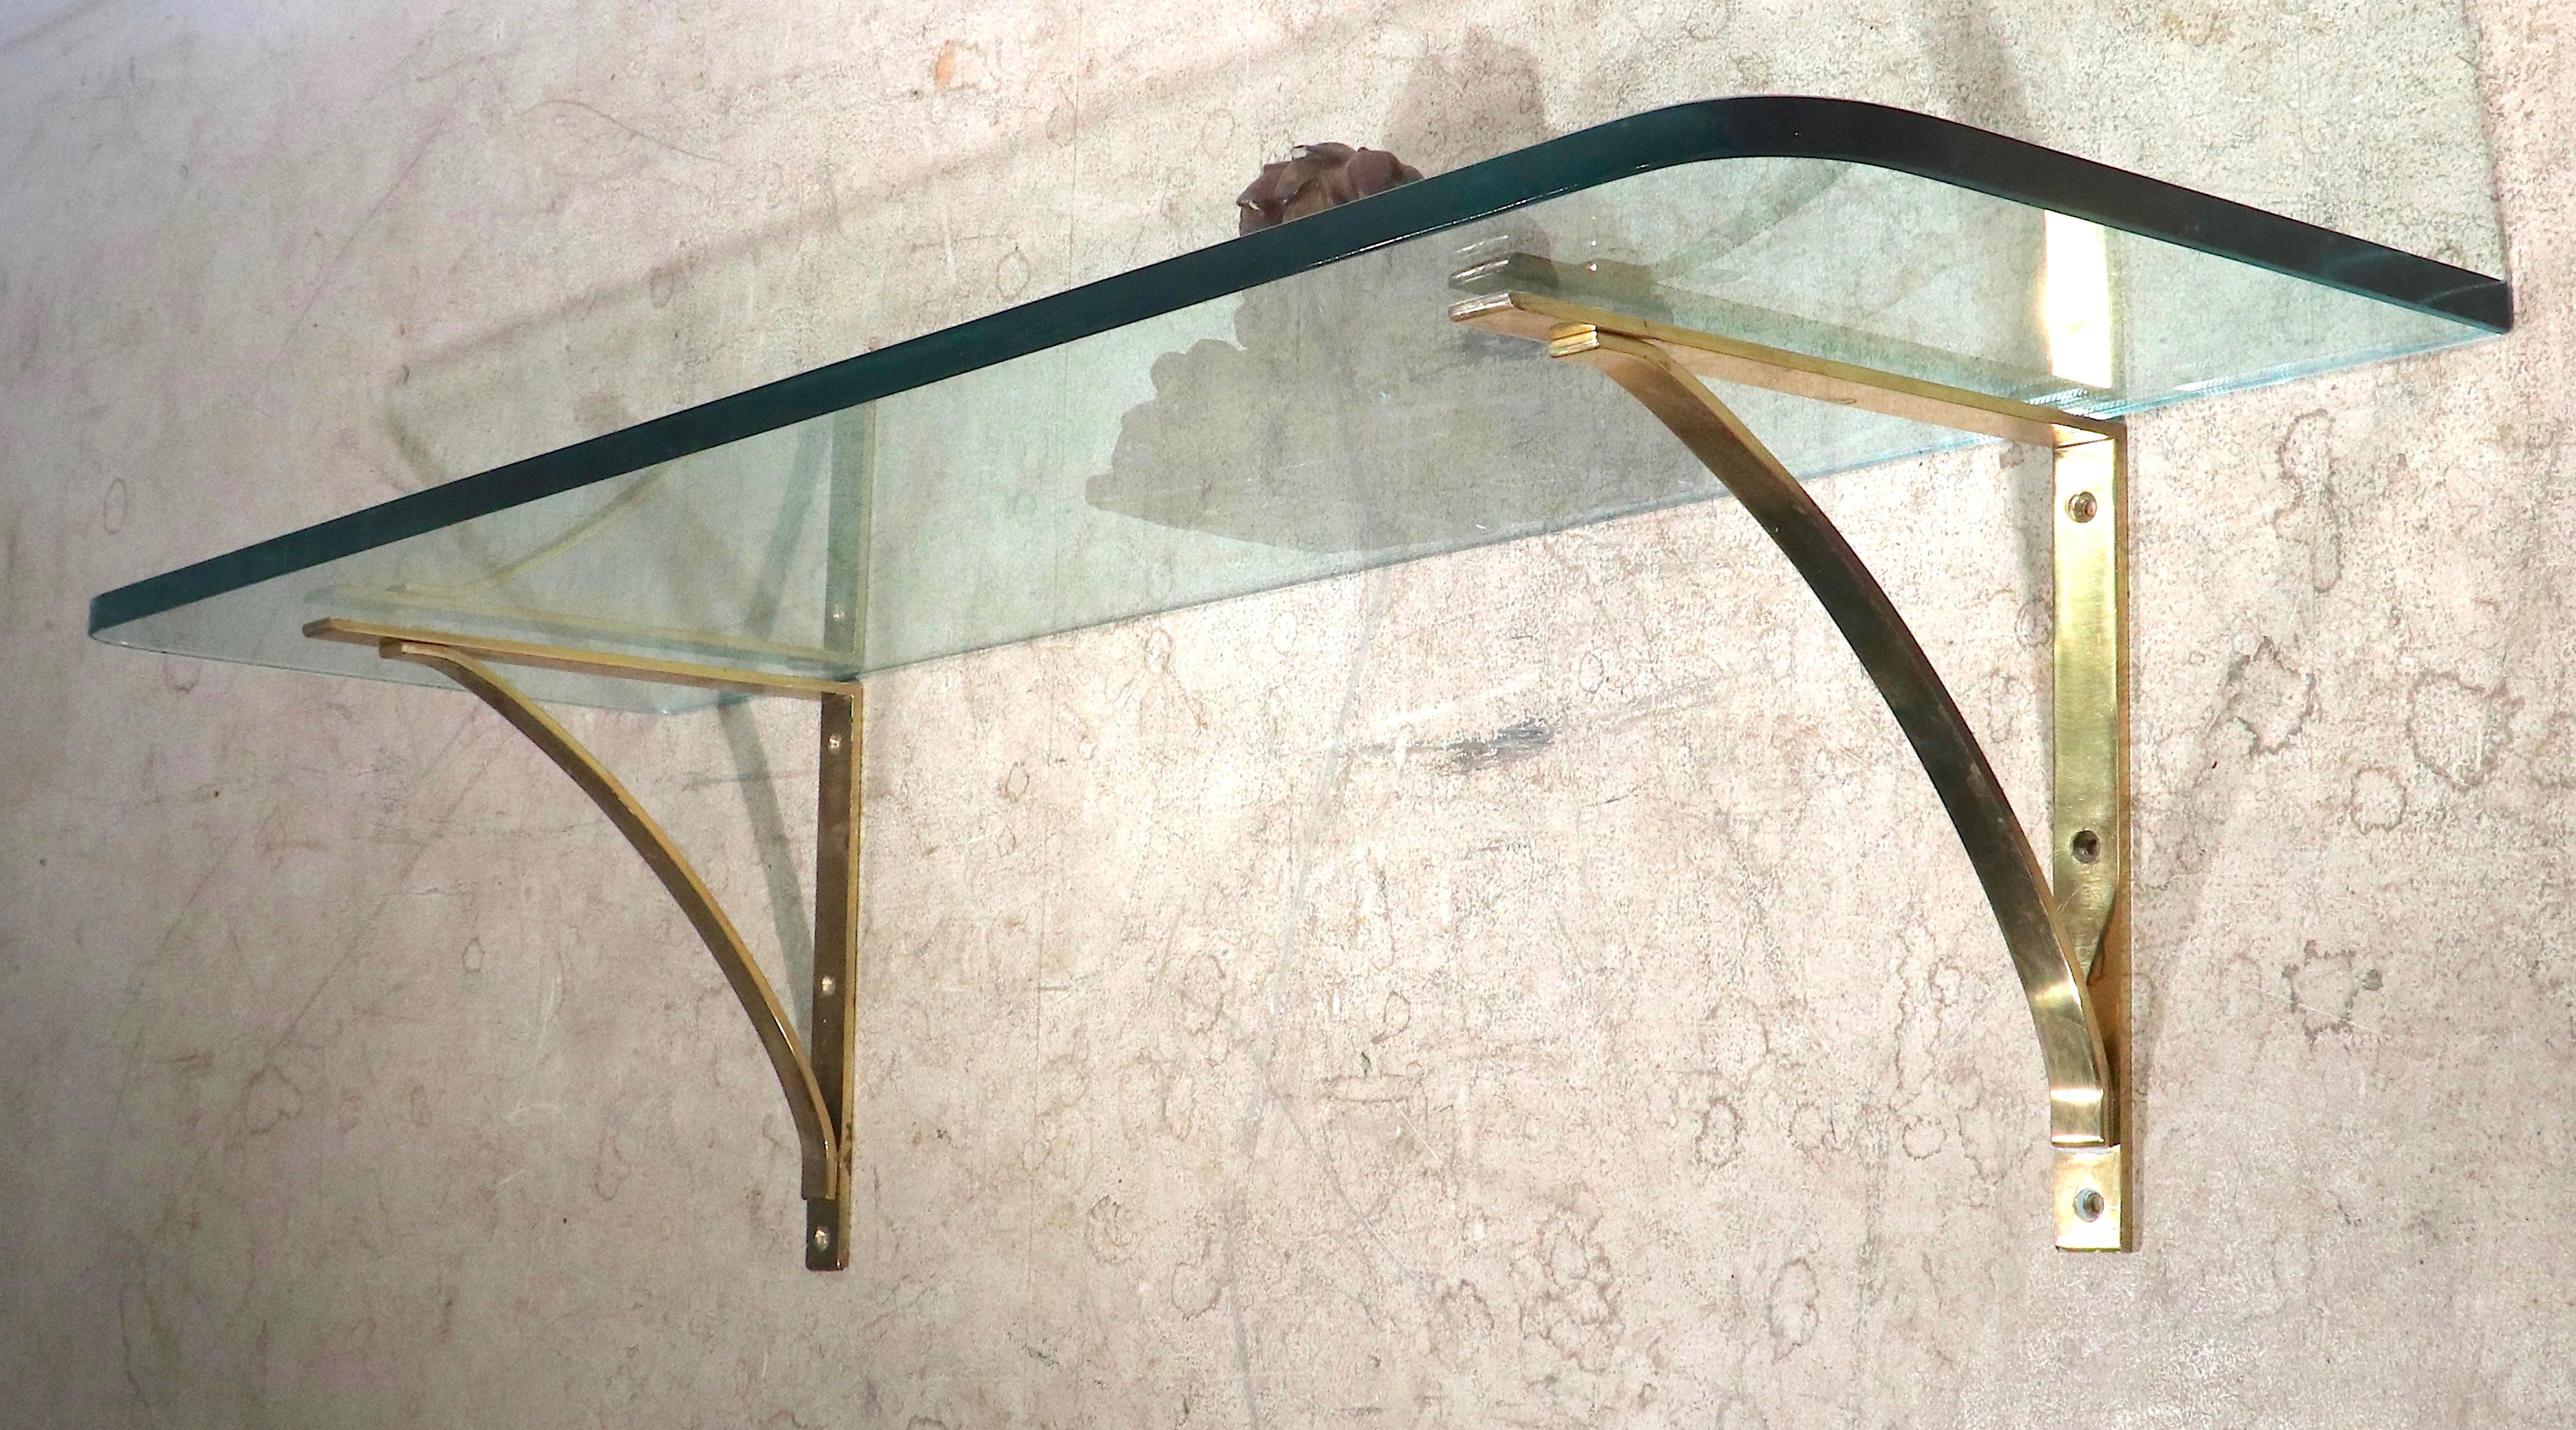 Post Modern Plate Glass and Brass Wall Mount Shelf, C. 1970's For Sale 2